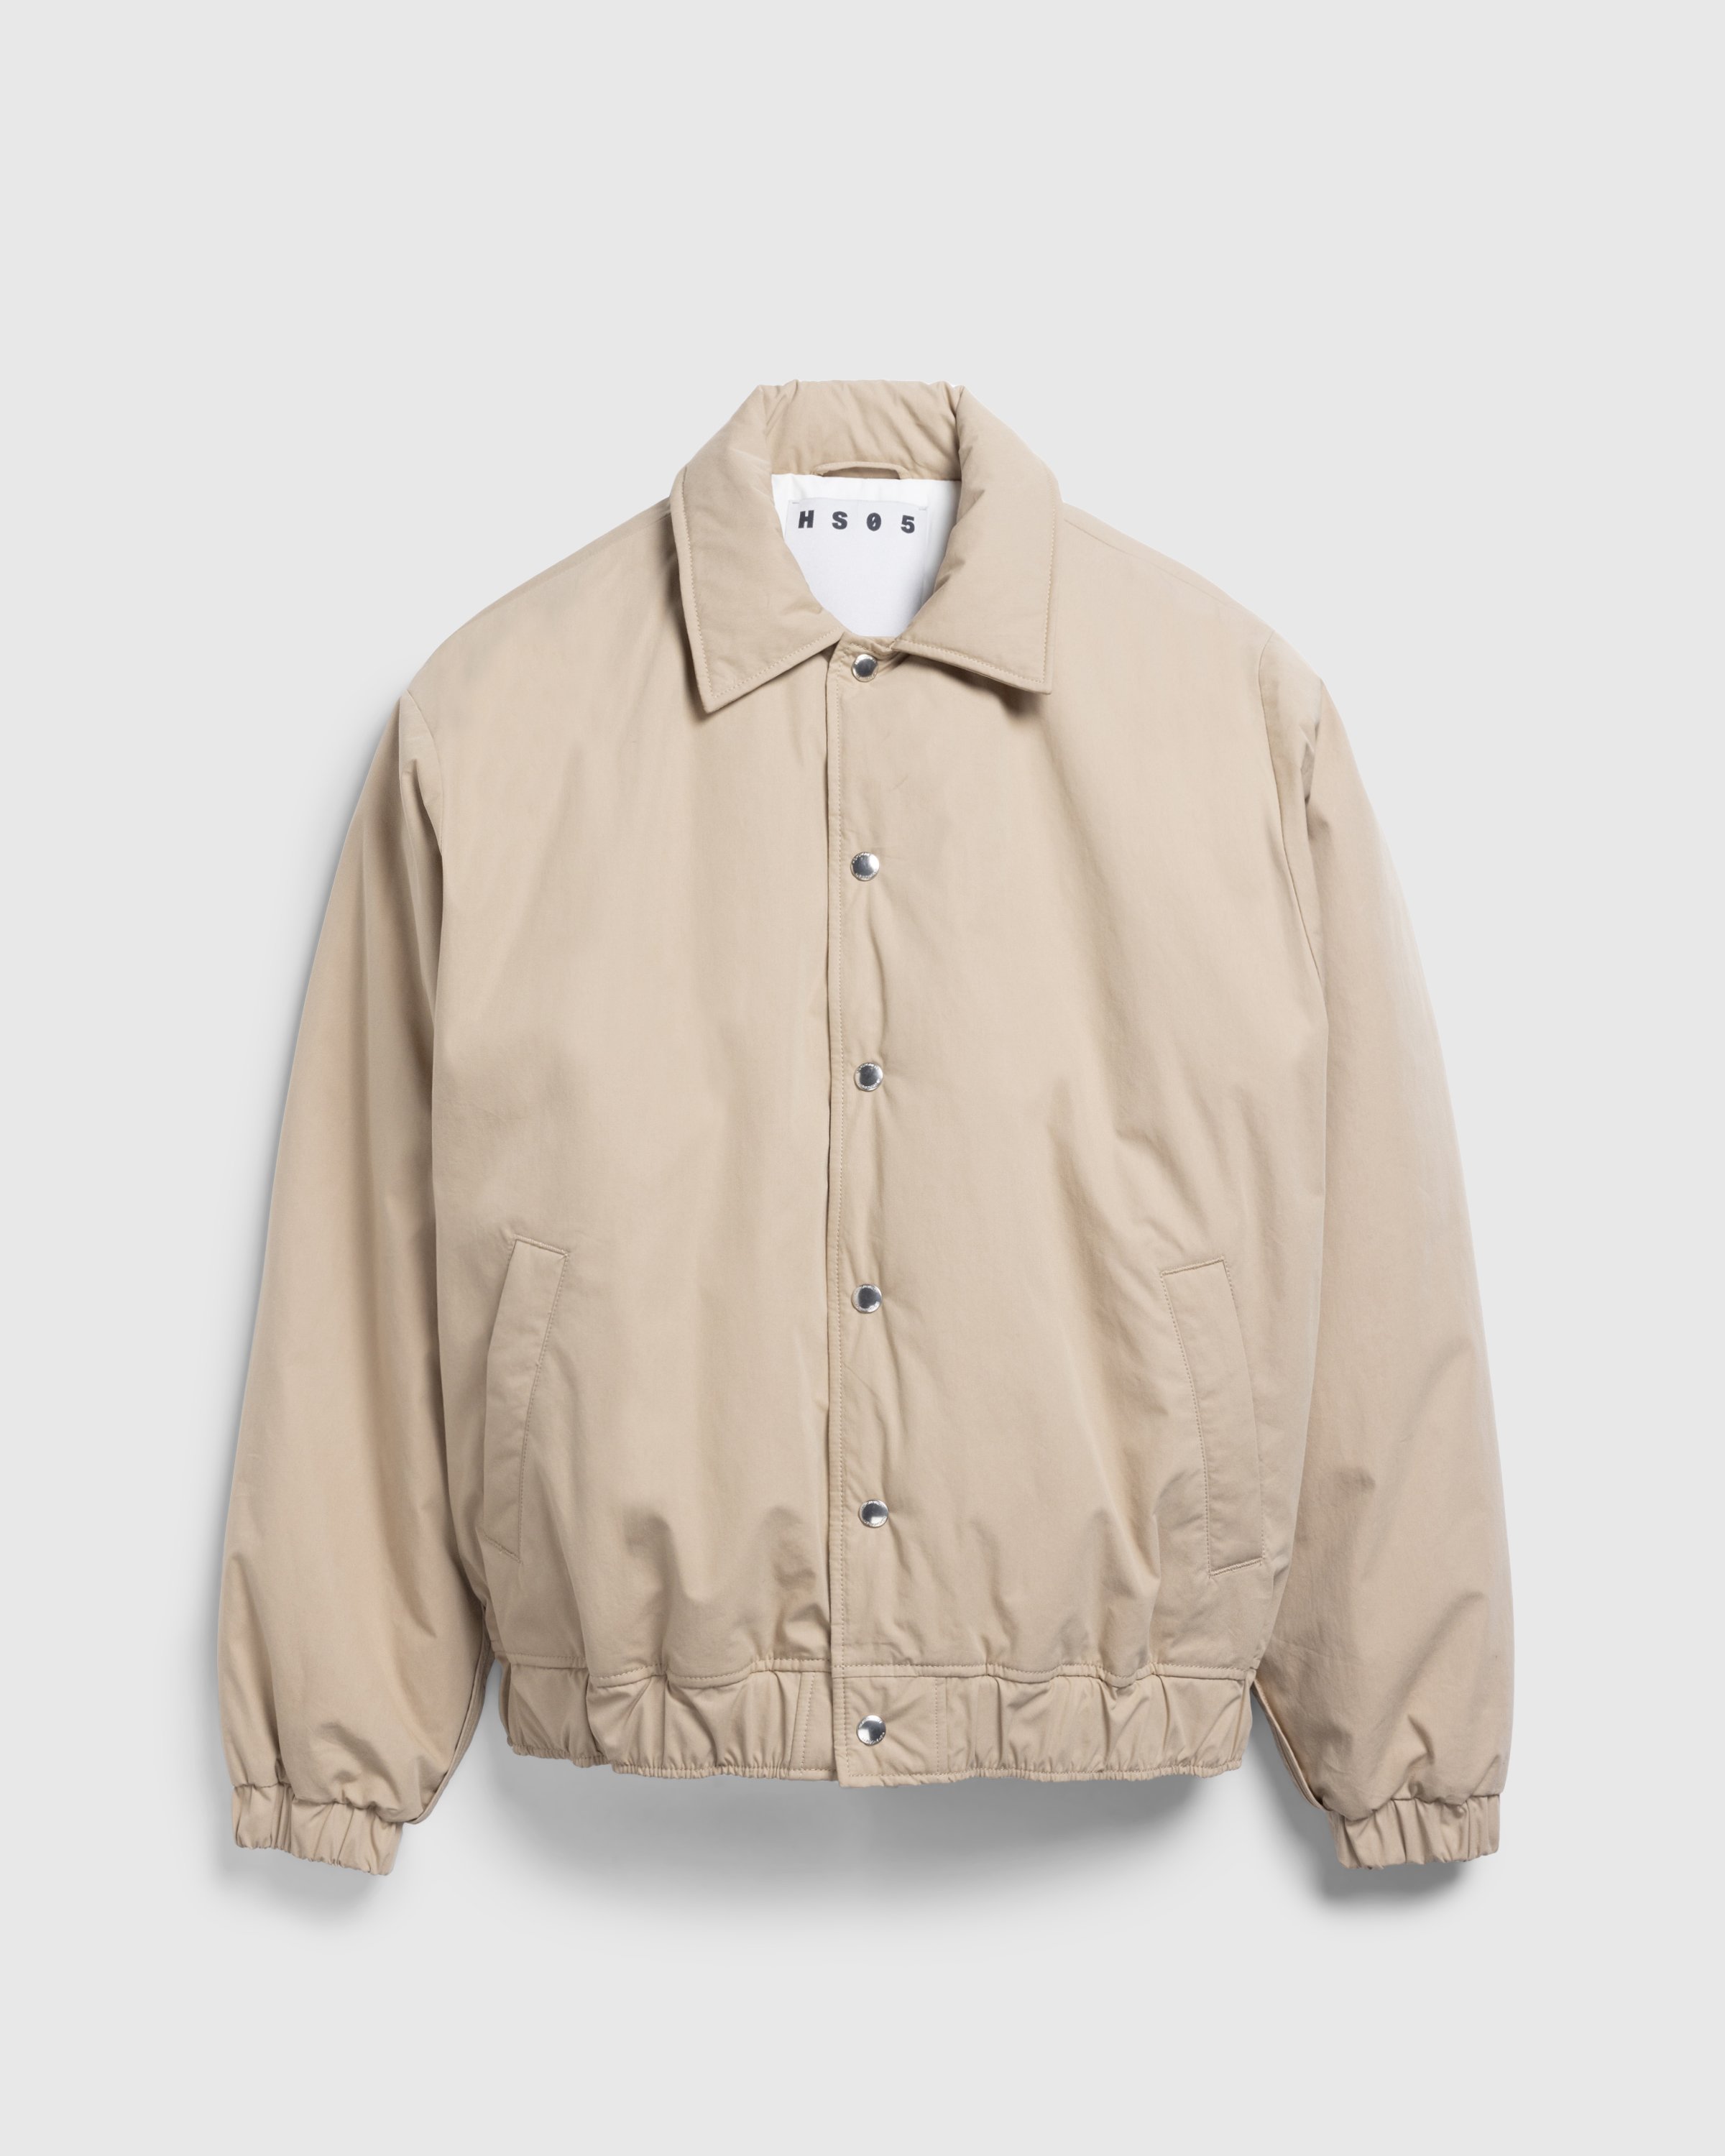 Highsnobiety HS05 - Reverse Piping Insulated Bomber - Clothing - Beige - Image 1